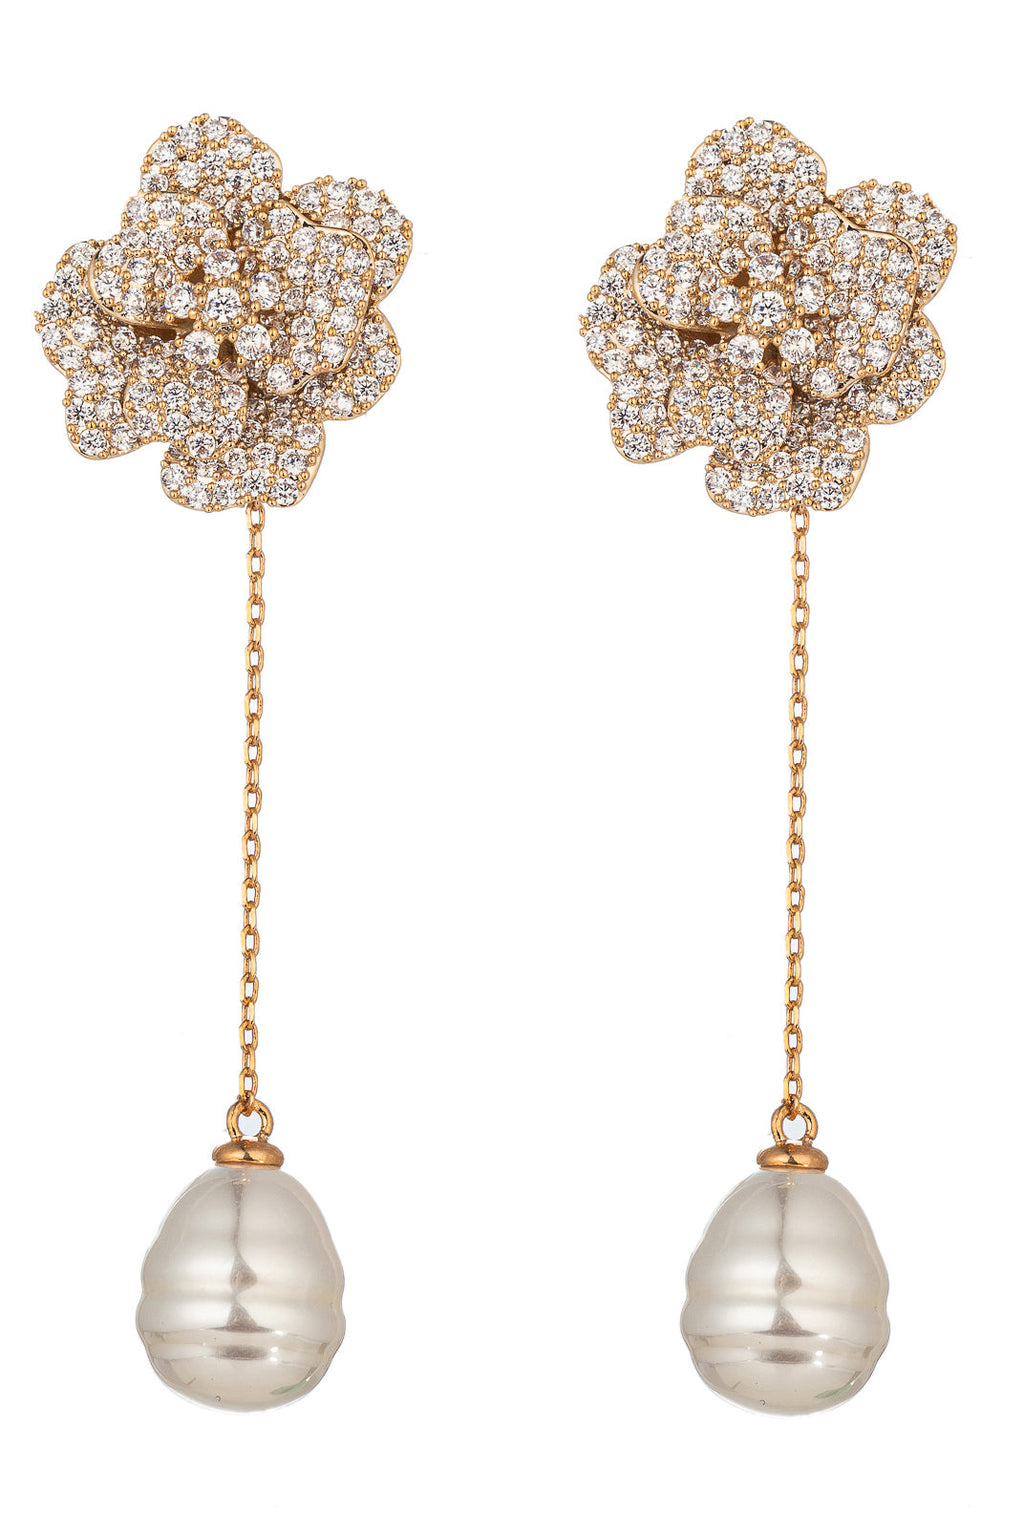 Golden Rose CZ Drop Earrings: Elegance meets charm with these sparkling beauties. 